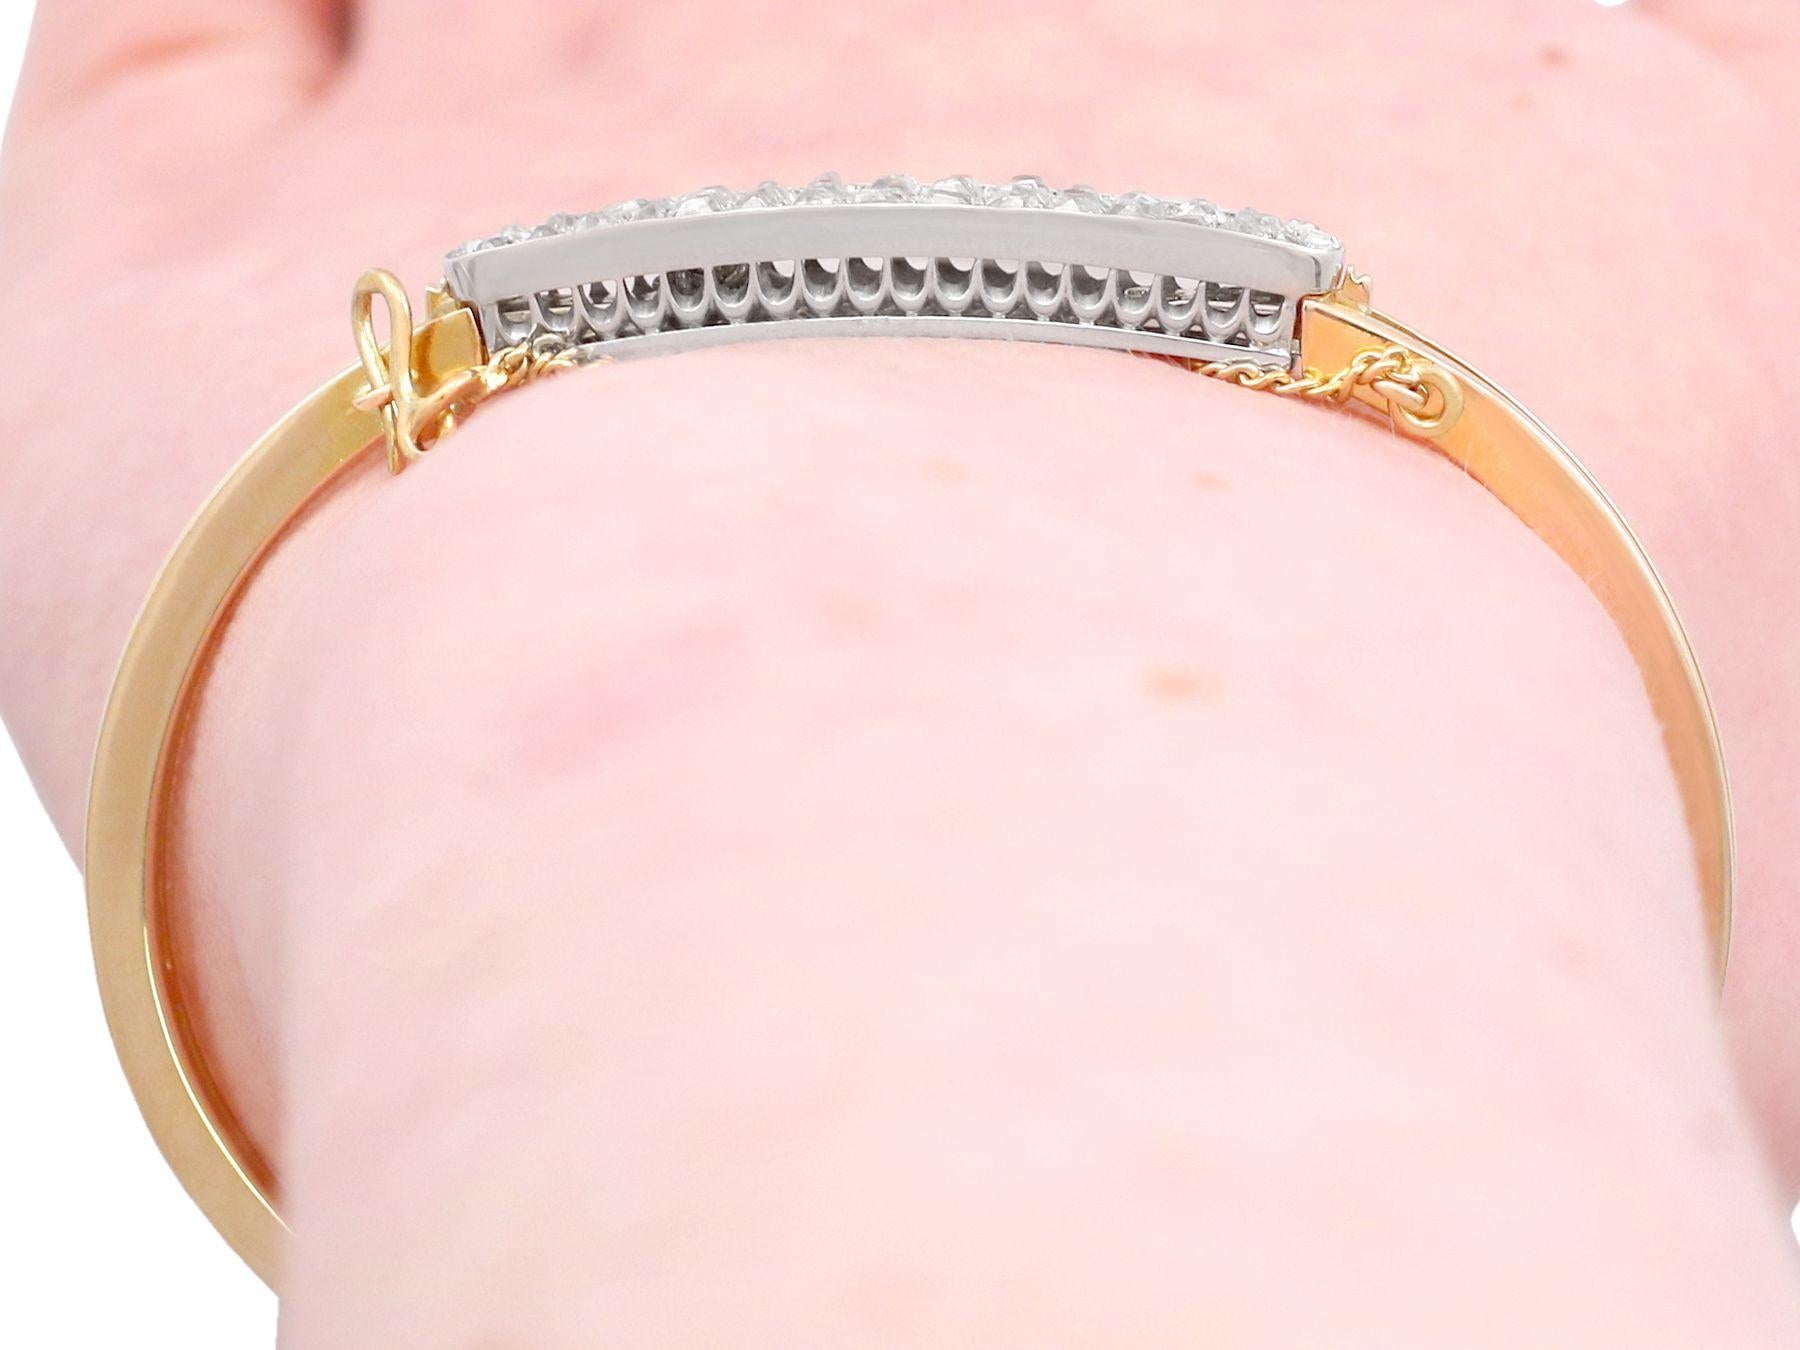 1935 Russian 2.25 Carat Diamond and Yellow Gold Bangle For Sale 3